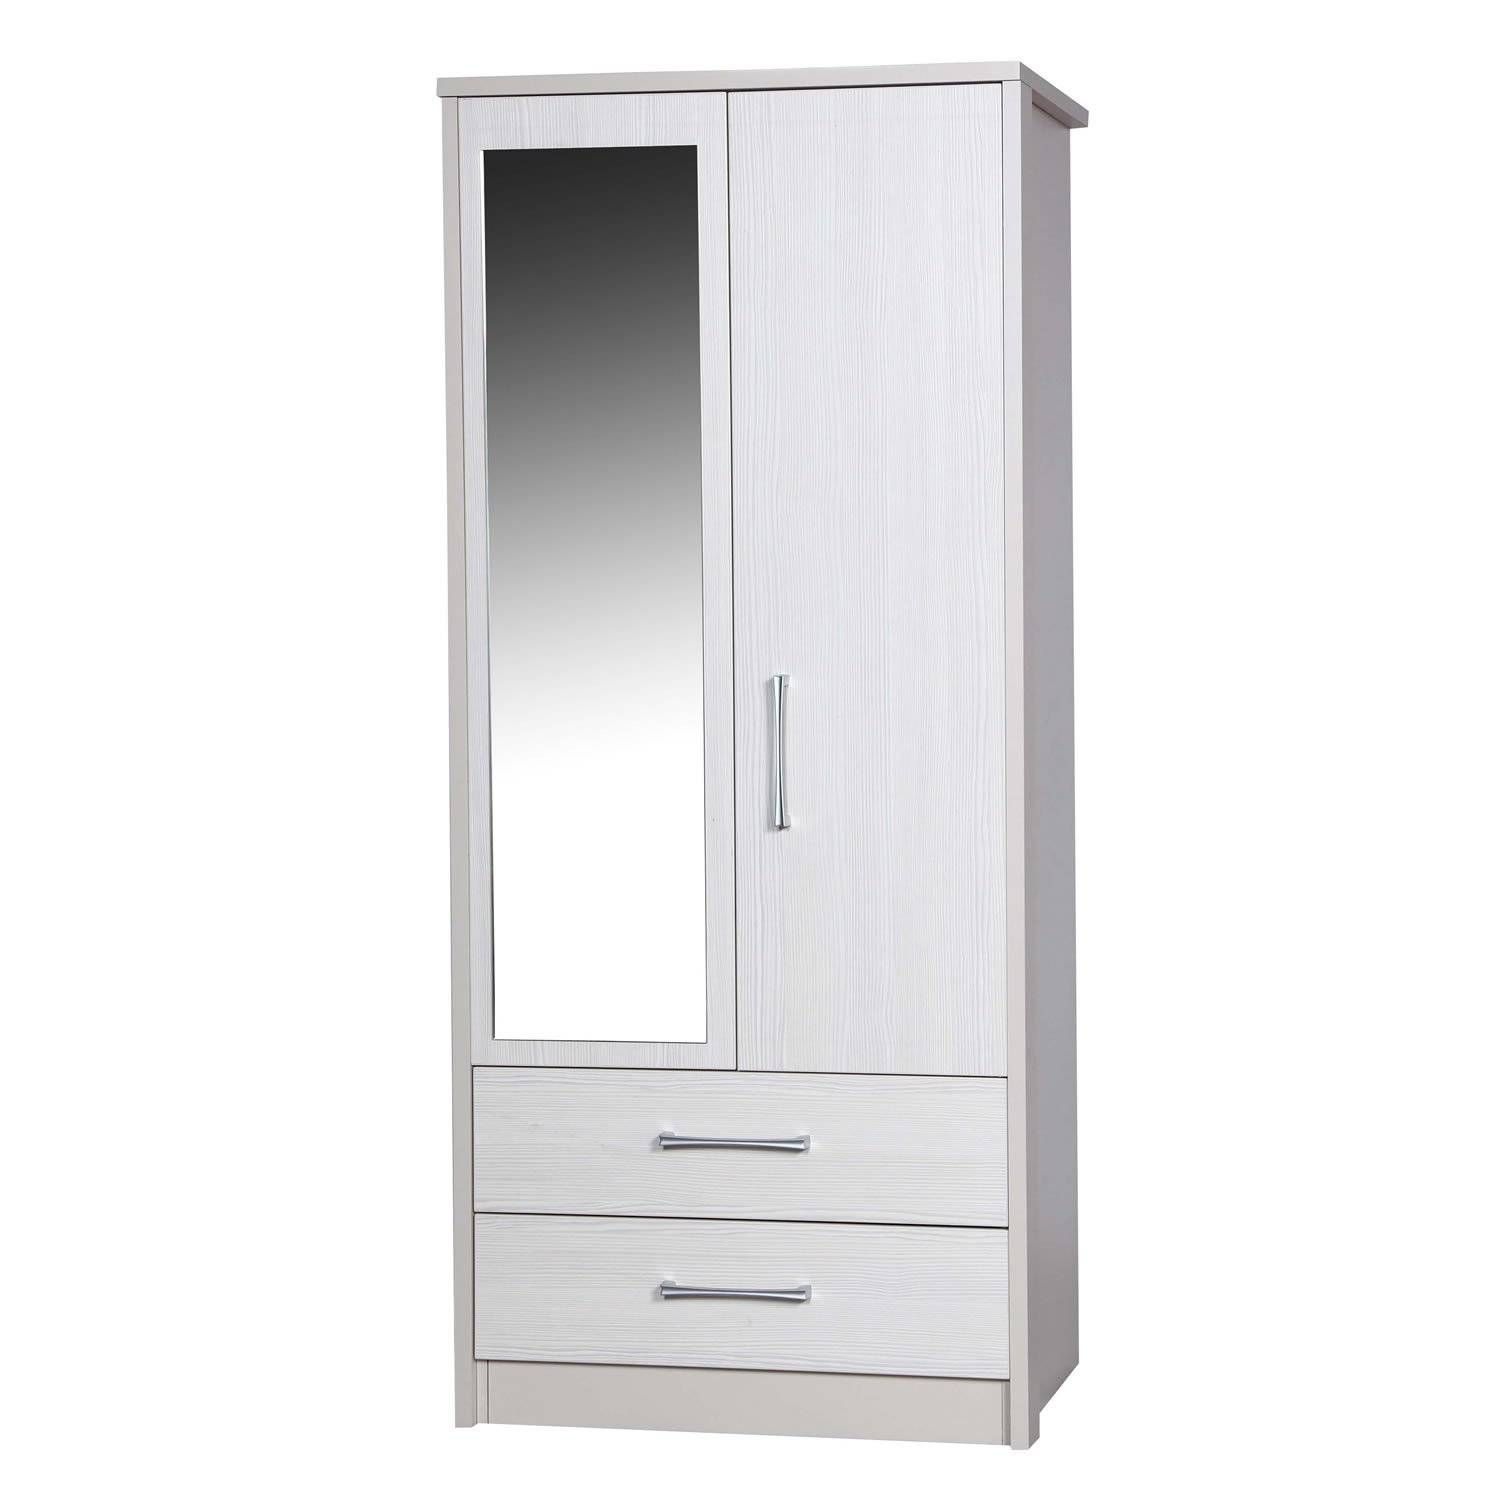 Avola White 2 Door 2 Drawer Combi Wardrobe With Mirror – Next Day Pertaining To White Wardrobes With Drawers And Mirror (View 1 of 15)